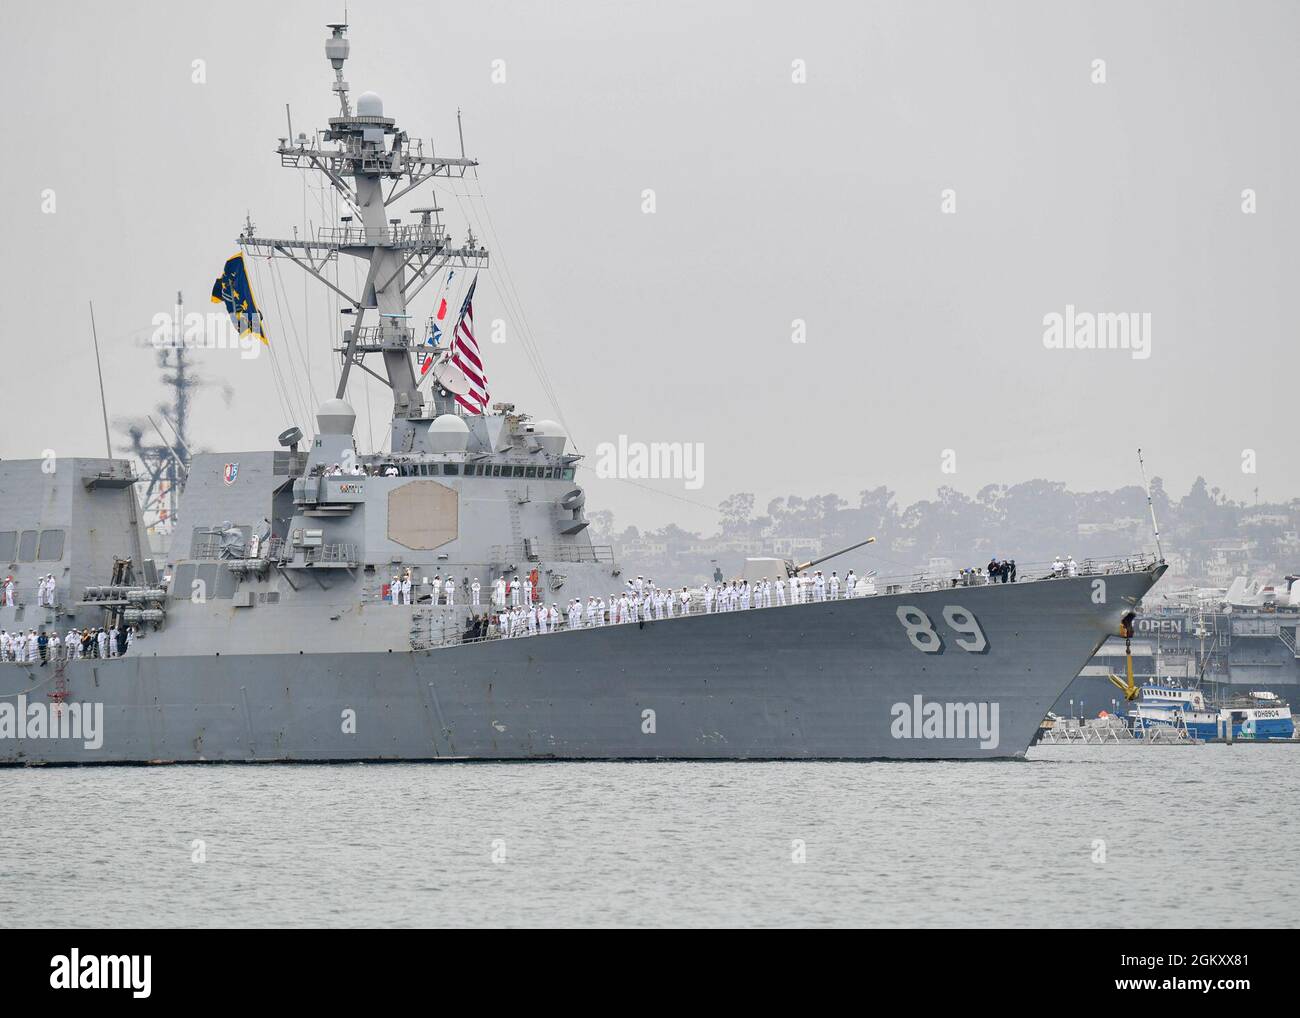 SAN DIEGO (July 22, 2021) - Arleigh Burke-class guided-missile destroyer USS Mustin (DDG 89) returned to San Diego, after 15 years serving in the Forward Deployed Naval Forces (FDNF) in Japan, July 22. Commander, Naval Surface Force, U.S. Pacific Fleet (CNSP) delivers and sustains the full spectrum of balanced, affordable, and resilient naval power through manpower, training, and equipment. As Commander, Naval Surface Forces (CNSF), CNSF leads Surface Warfare policy with a fleet-focused perspective and develops the professional expertise of surface warfare officers. Stock Photo